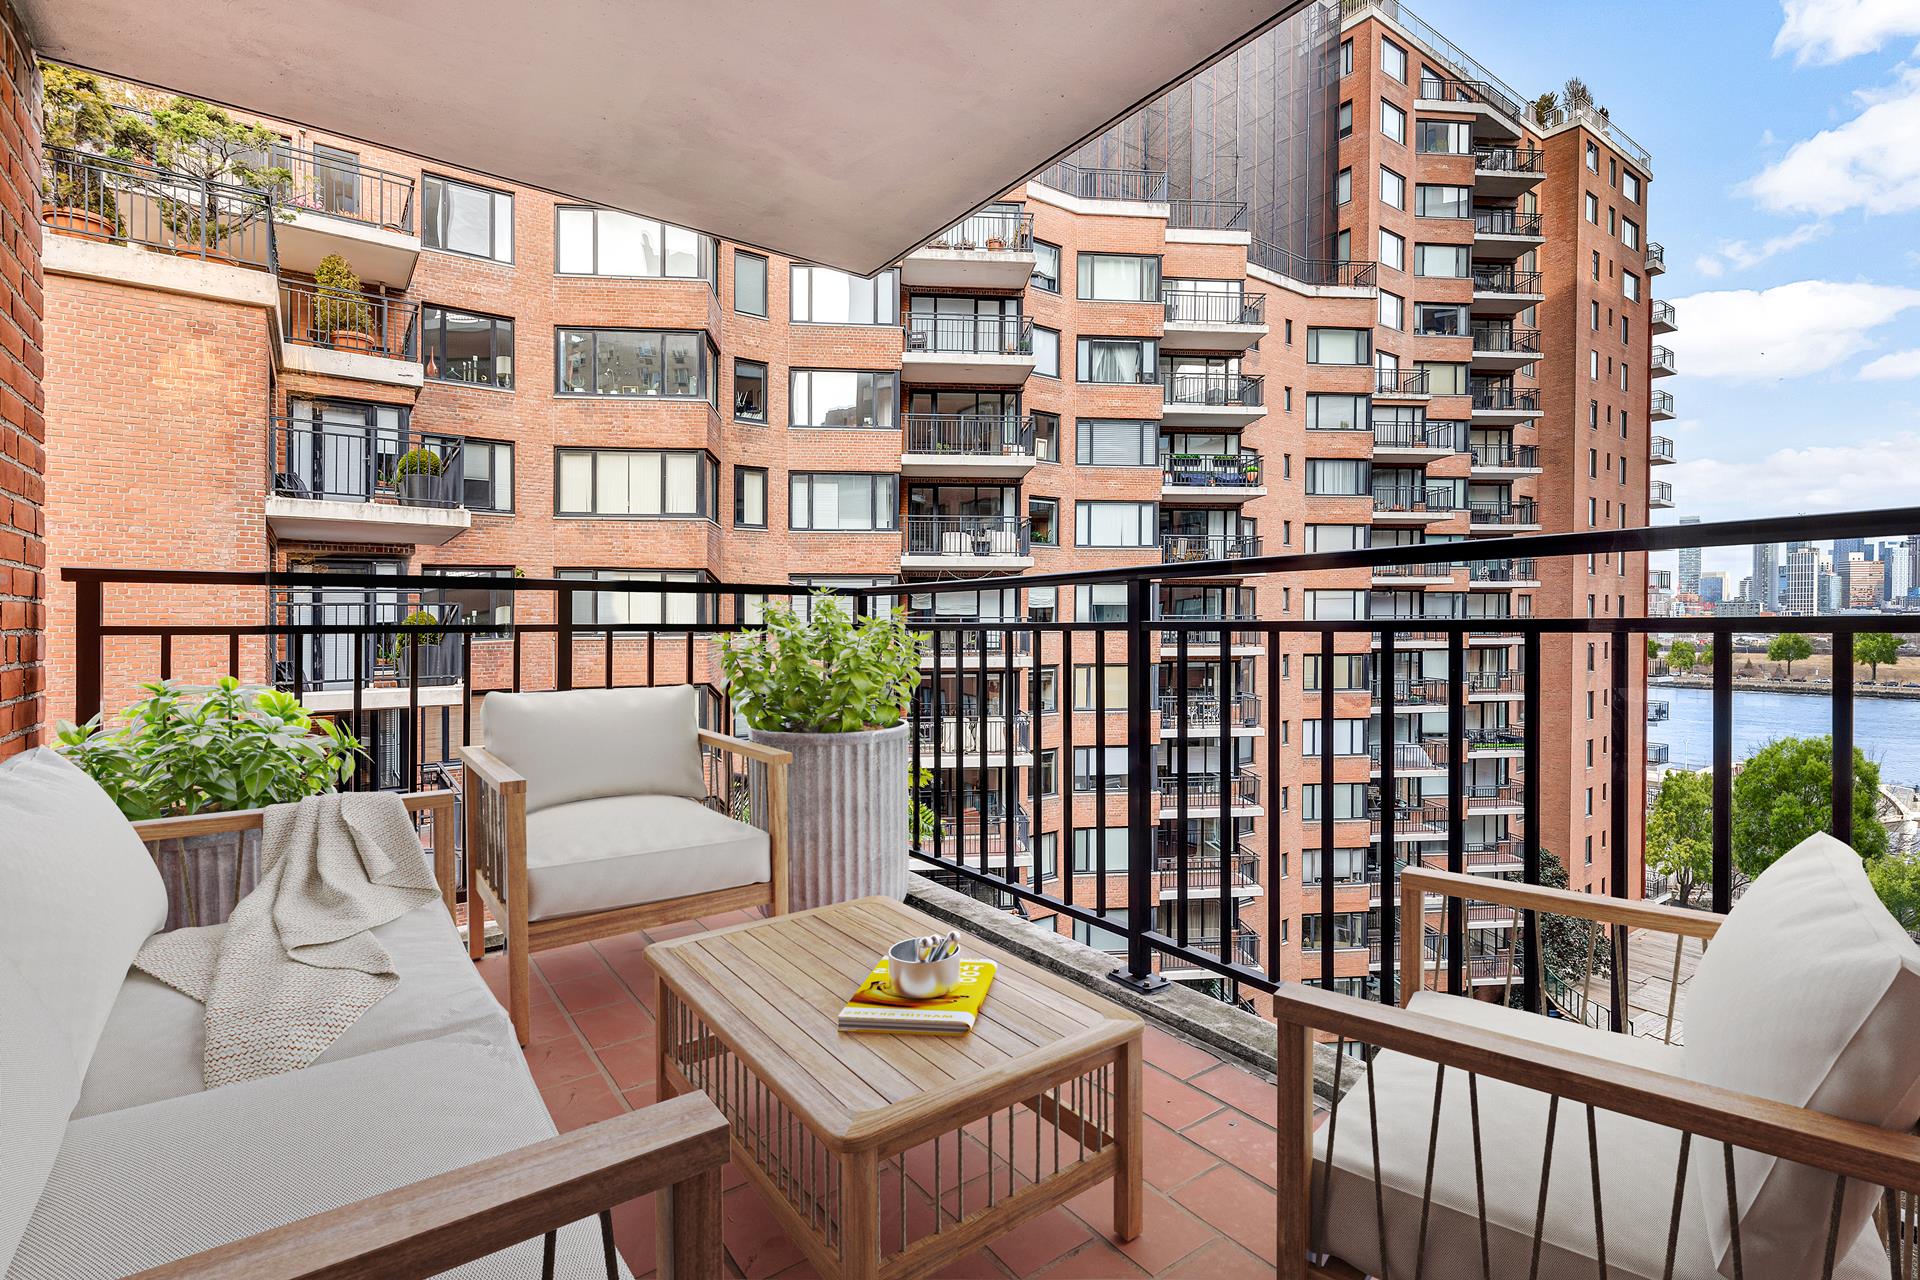 60 Sutton Place 9Js, Sutton, Midtown East, NYC - 2 Bedrooms  
2 Bathrooms  
5 Rooms - 